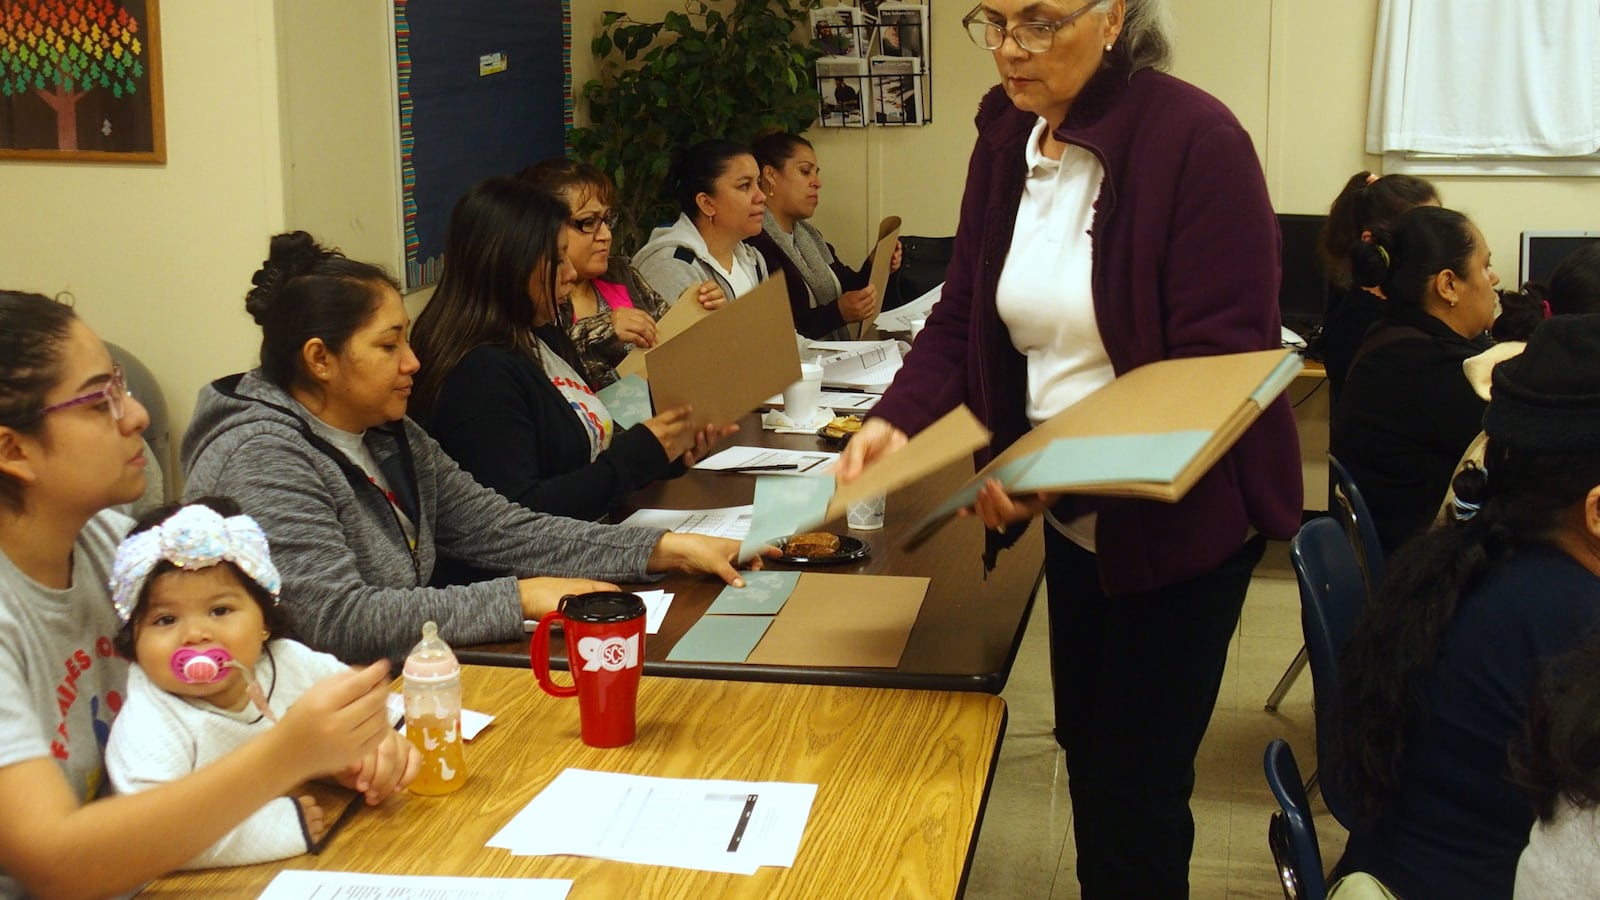 A recent parent academy for Spanish-speaking mothers at Egypt Elementary School.